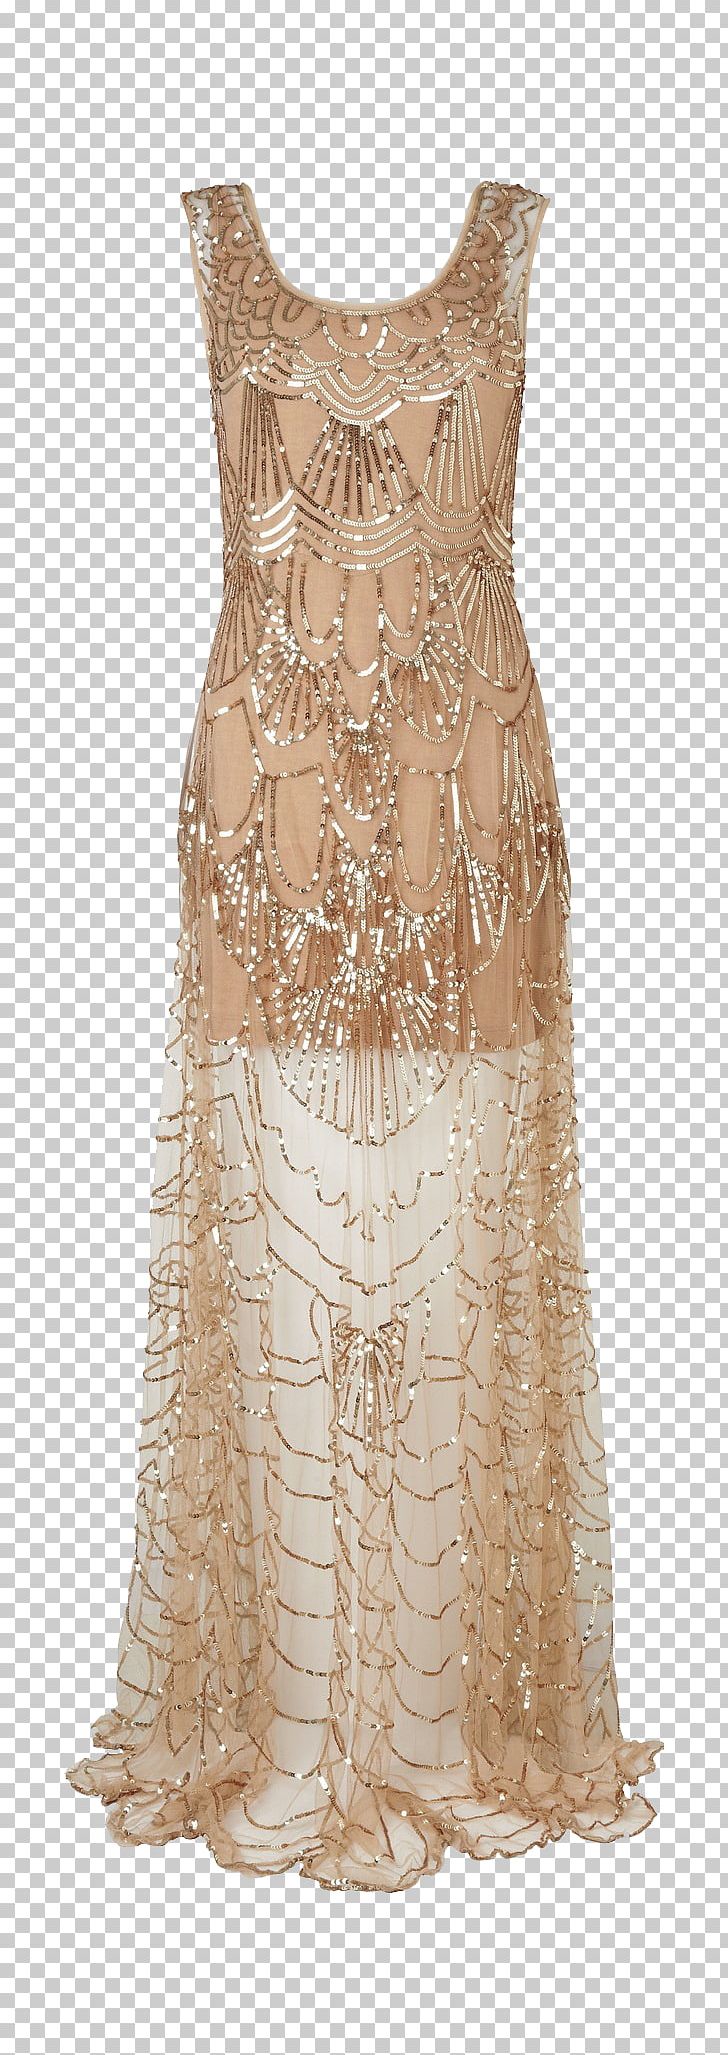 1920s Flapper Dress Fashion Gown PNG, Clipart, 1920s, Art Deco, Baby Dress, Beige, Bridal Party Dress Free PNG Download